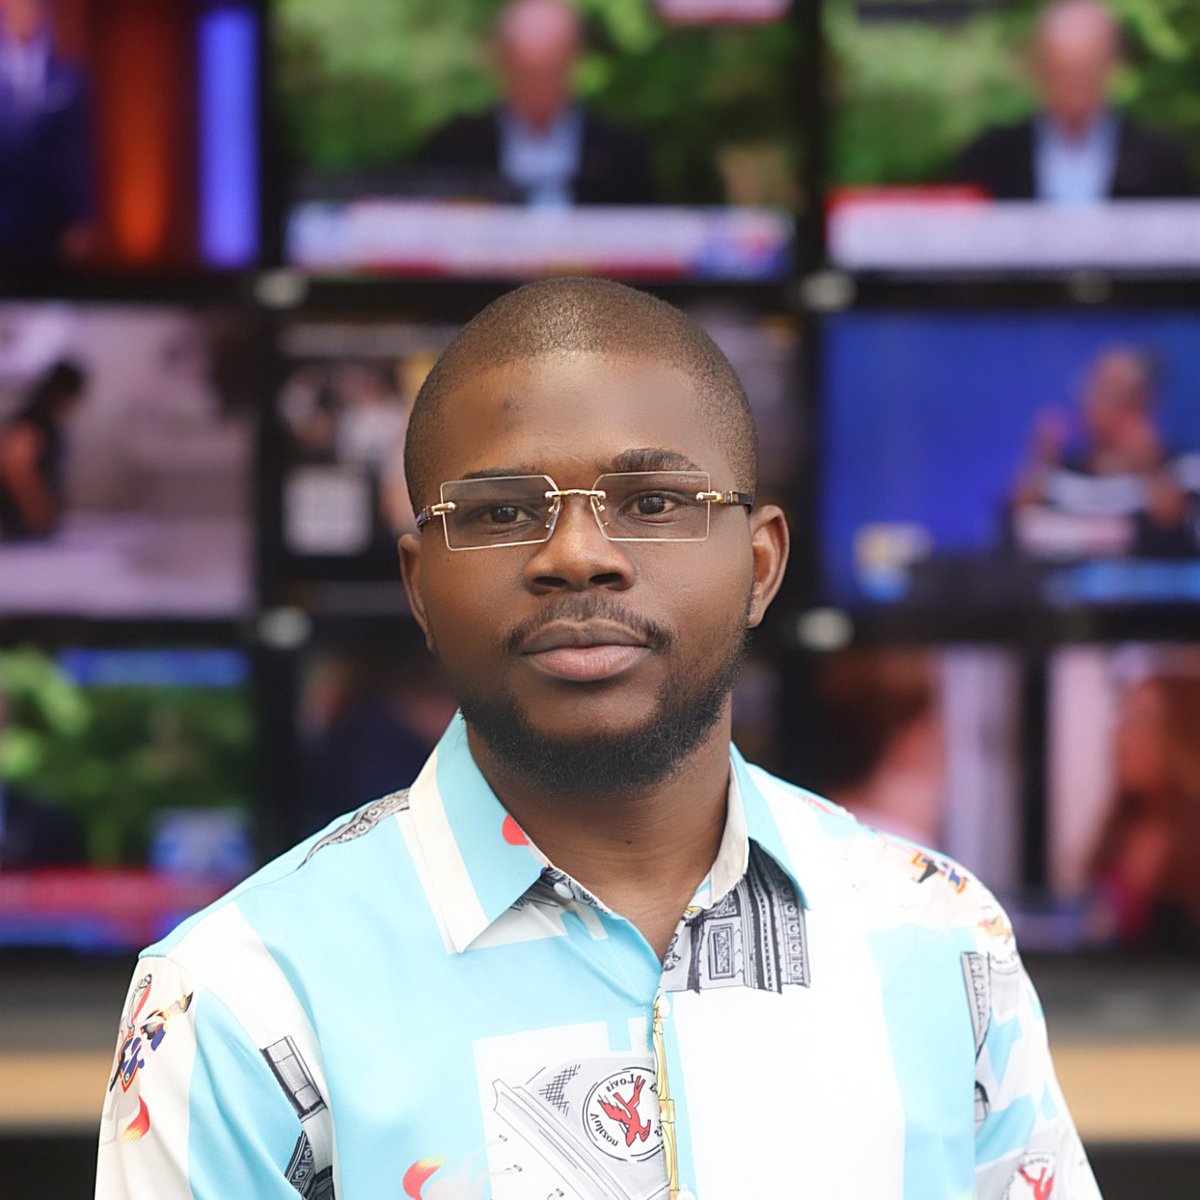 Ph. D. student @UgochukwuCFR received the Student Impact Grant for his project Ọgbanje - the Sickle Cell Disease Misinformation in Nigeria: Media as a SOURCEtainable Solution. This grant will help support his research over the summer. 1/2